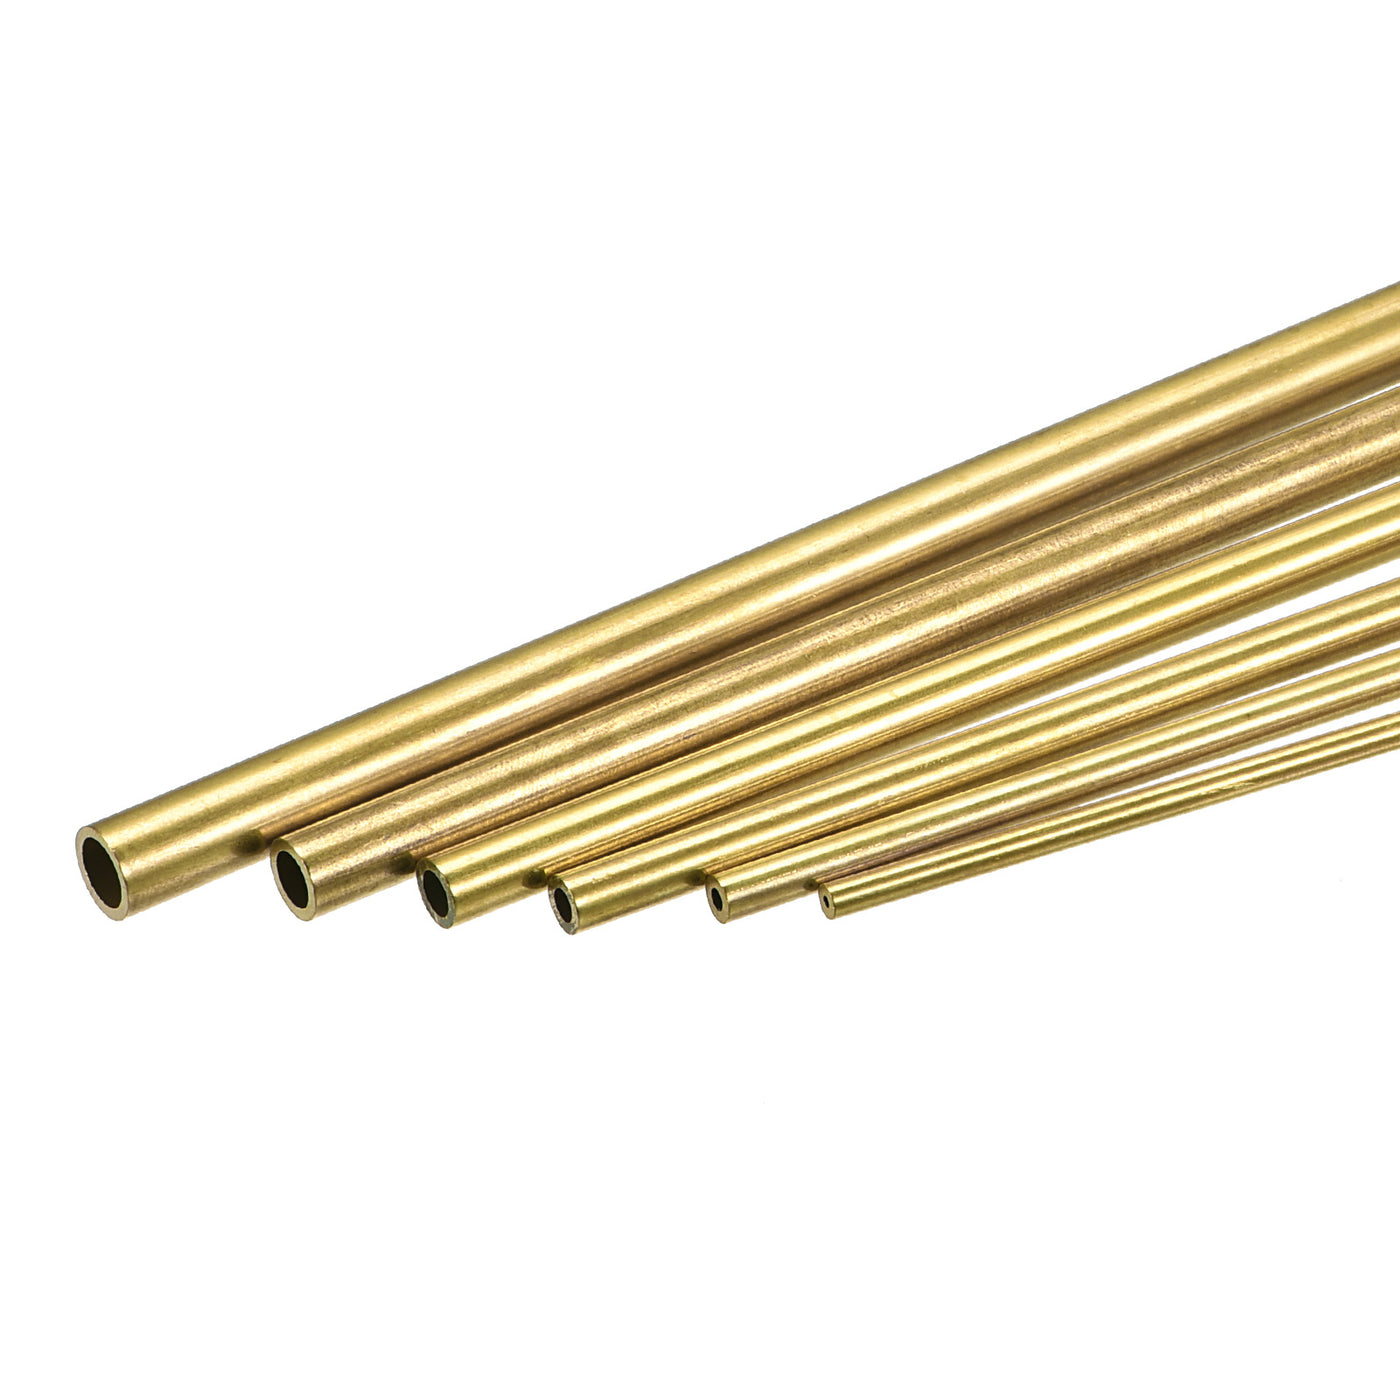 uxcell Uxcell Brass Tube, 7mm 8mm 9mm 10mm 11mm 12mm OD x 0.5mm Wall Thickness 200mm Length Metal Tubing, Pack of 6